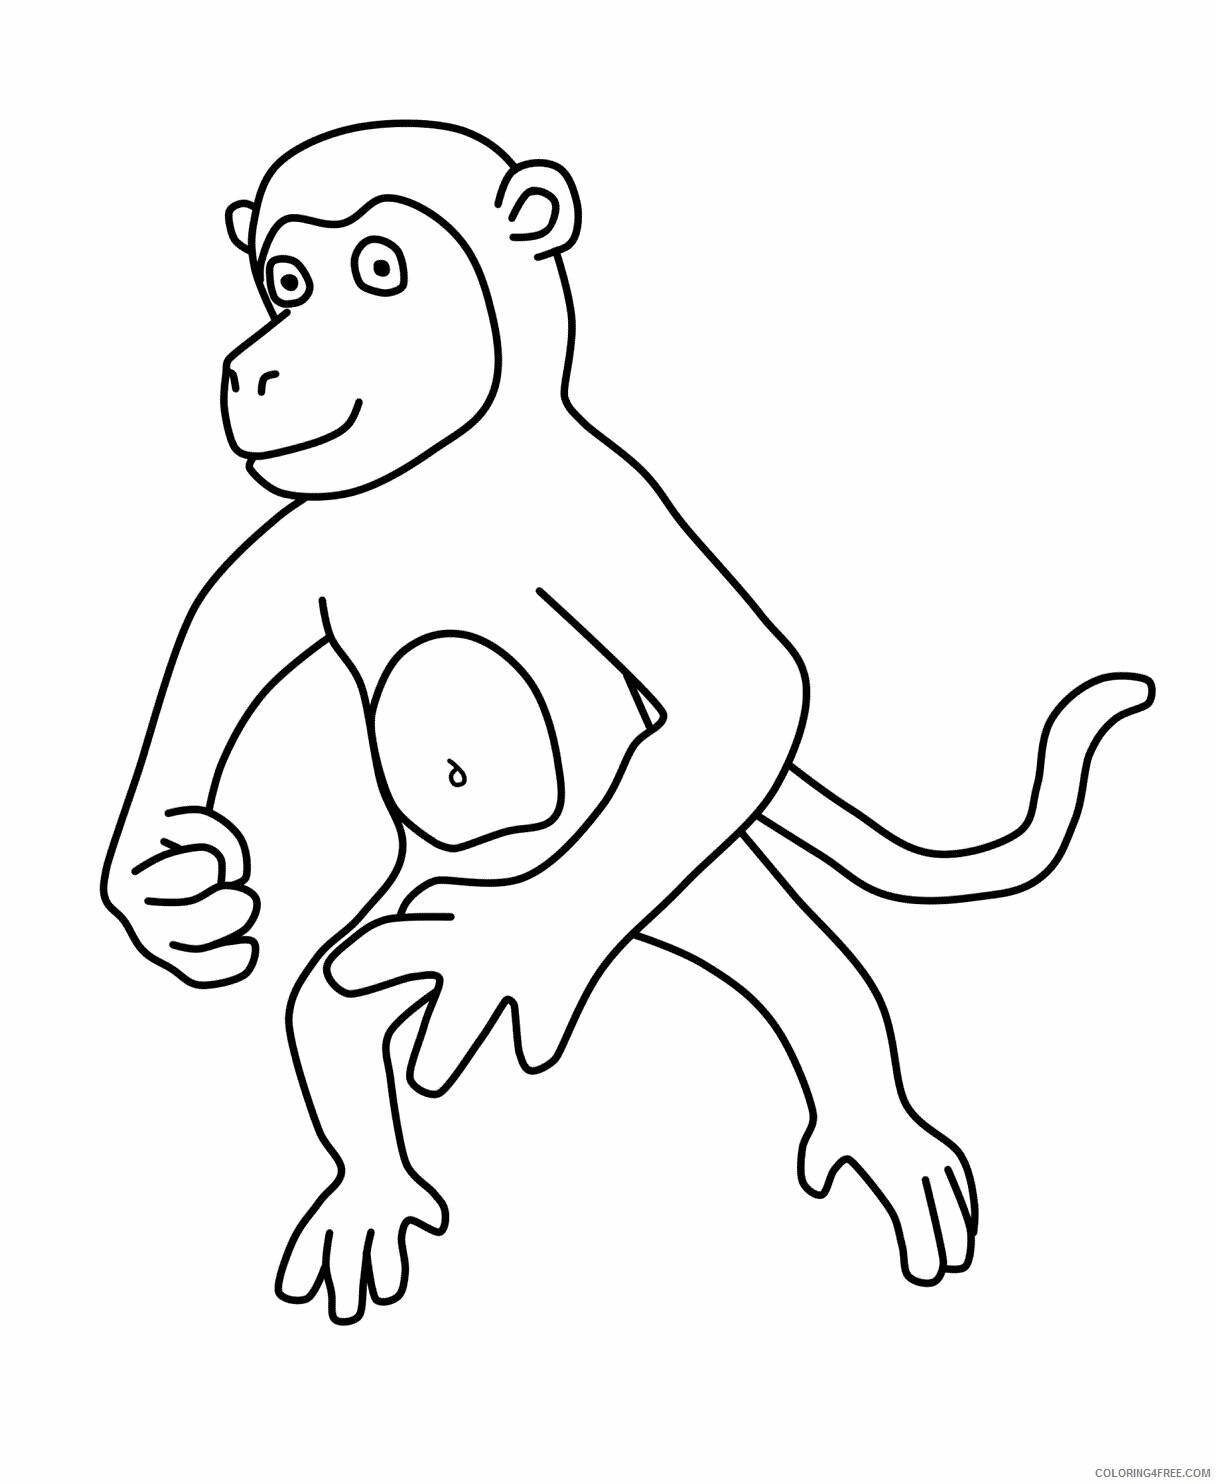 Monkey Coloring Pages Animal Printable Sheets Monkey 2 2021 3287 Coloring4free